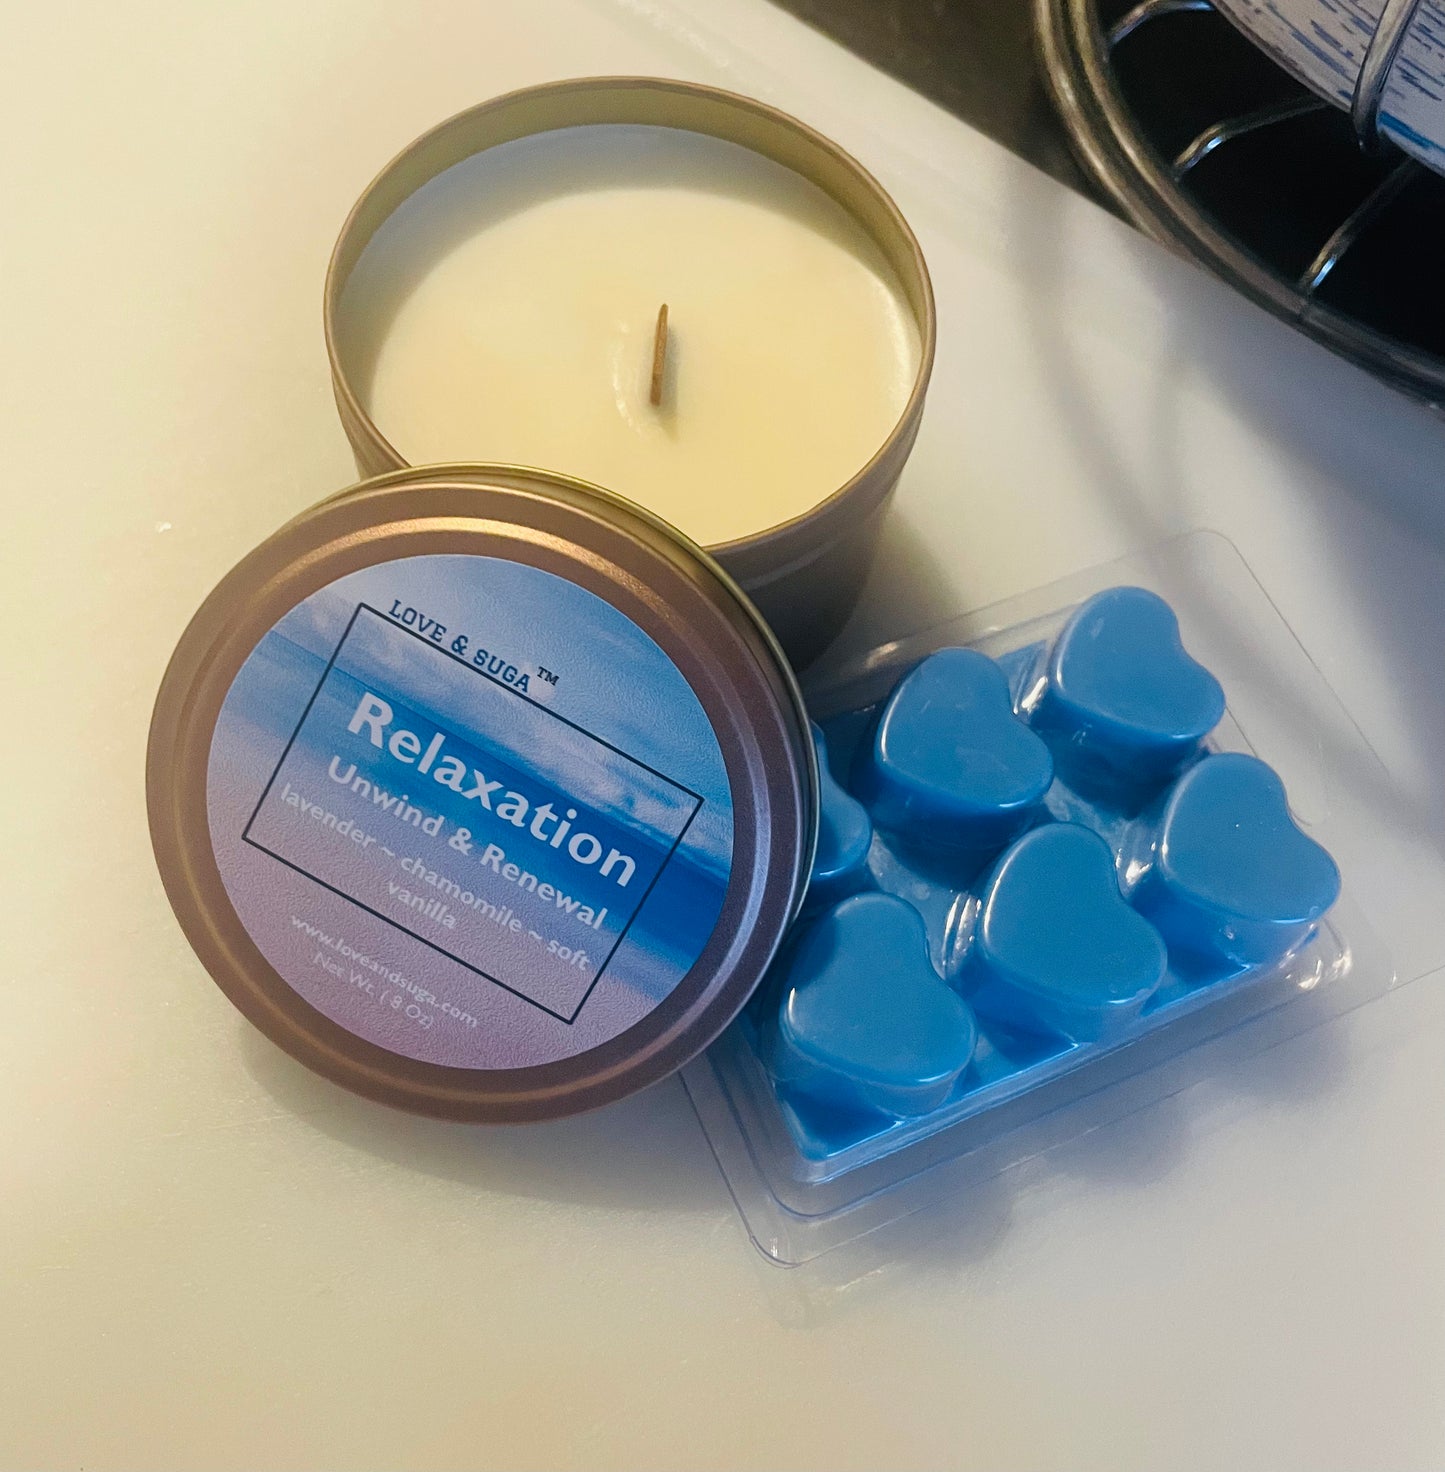 Relaxation Candle / Relaxation Wax Melts